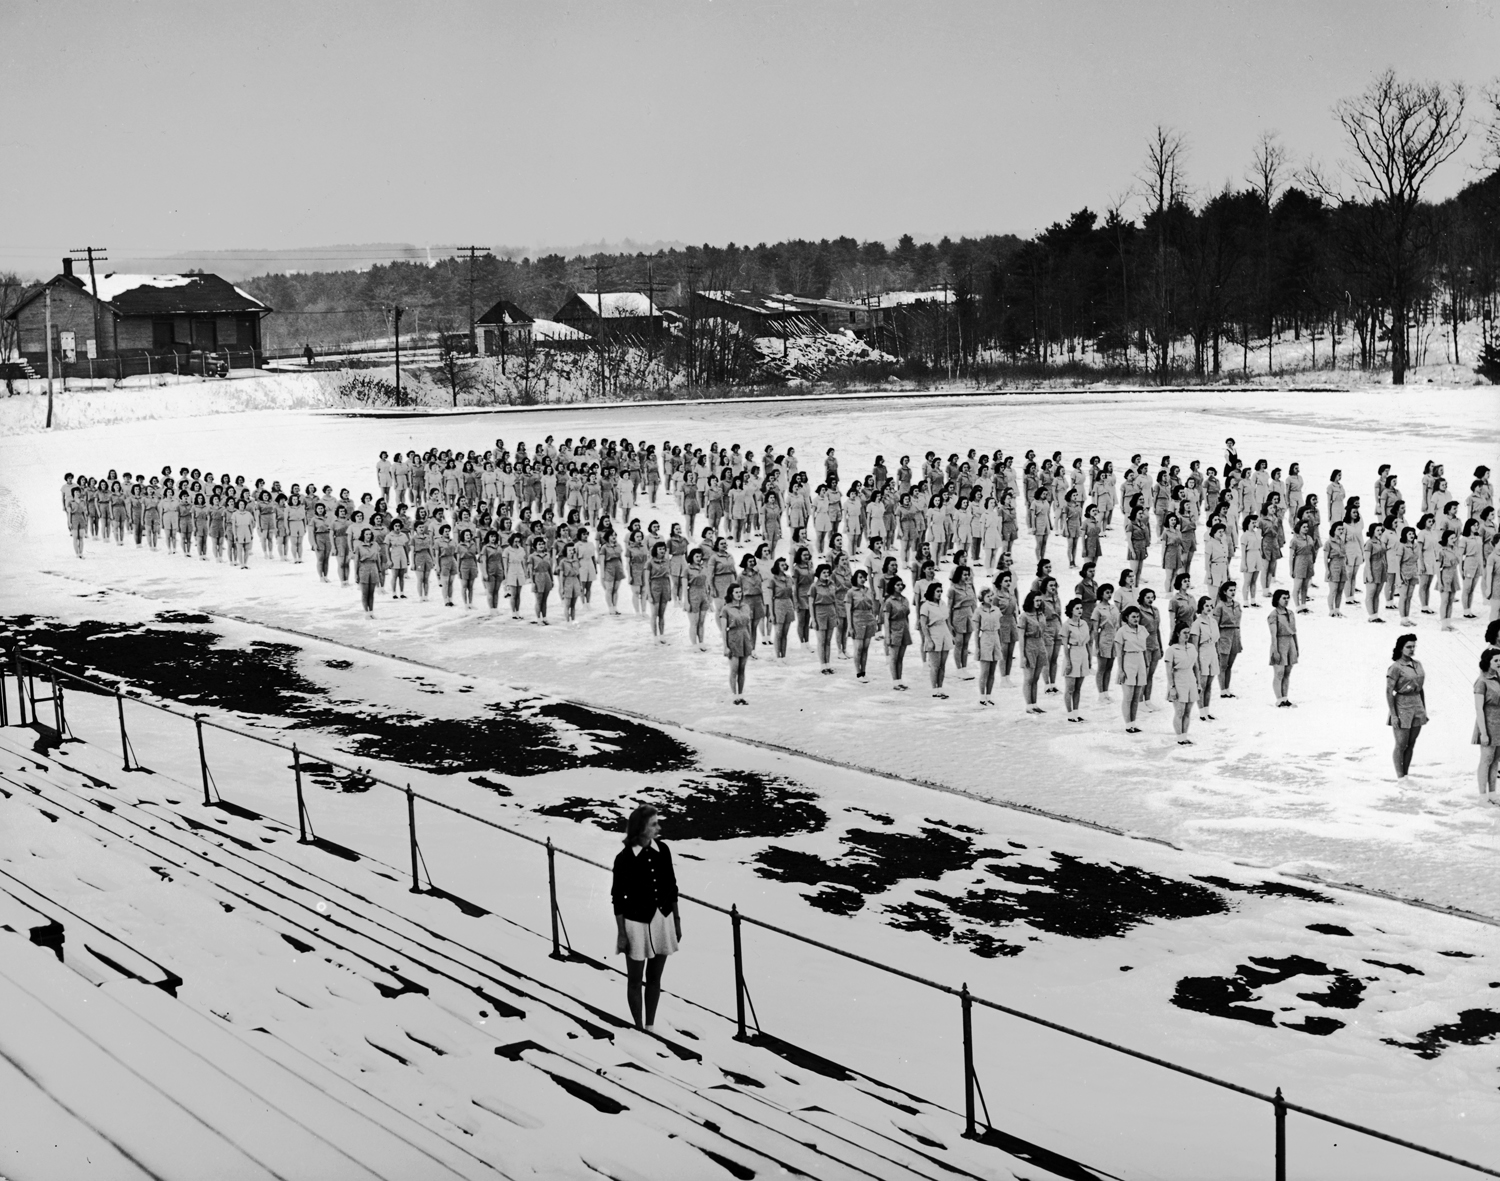 Coeds at the University of New Hampshire perform military drills in freezing weather, 1942.